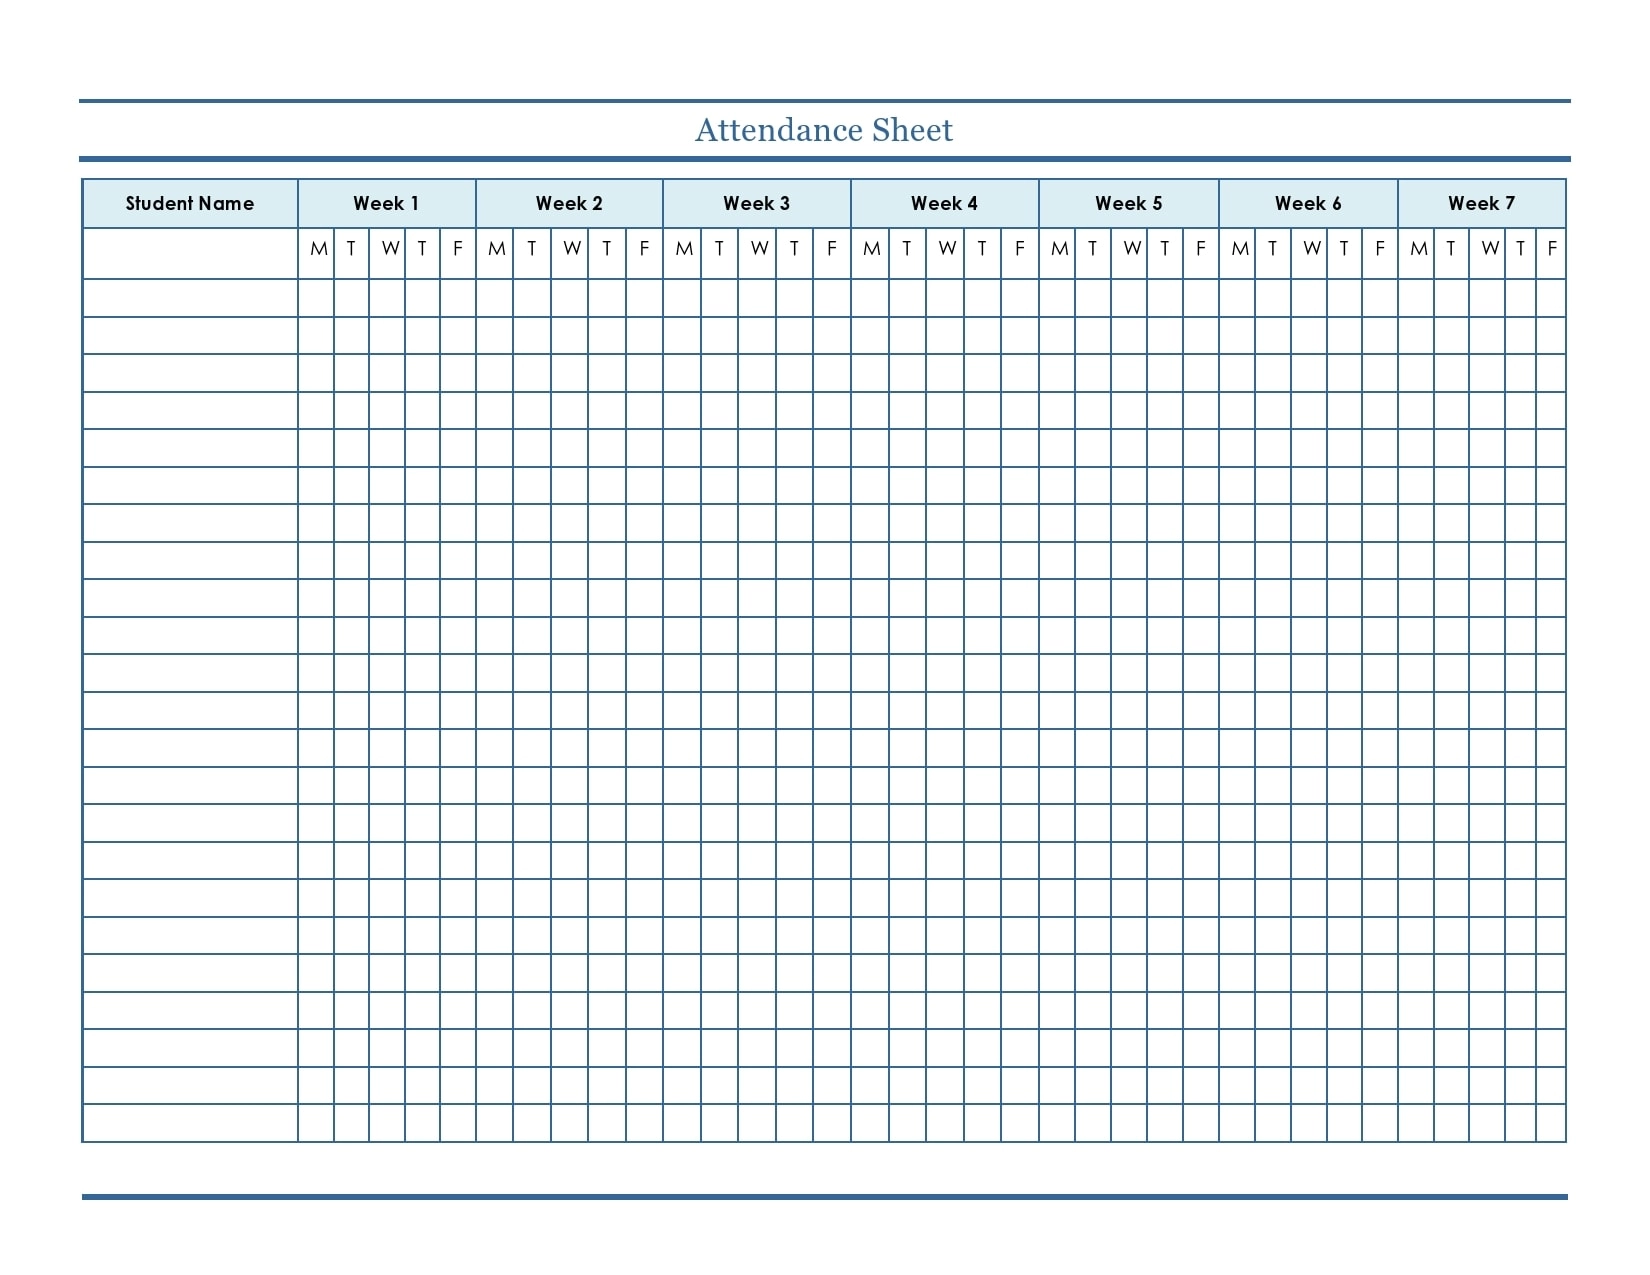 Weekly Attendance Sheet Template Excel